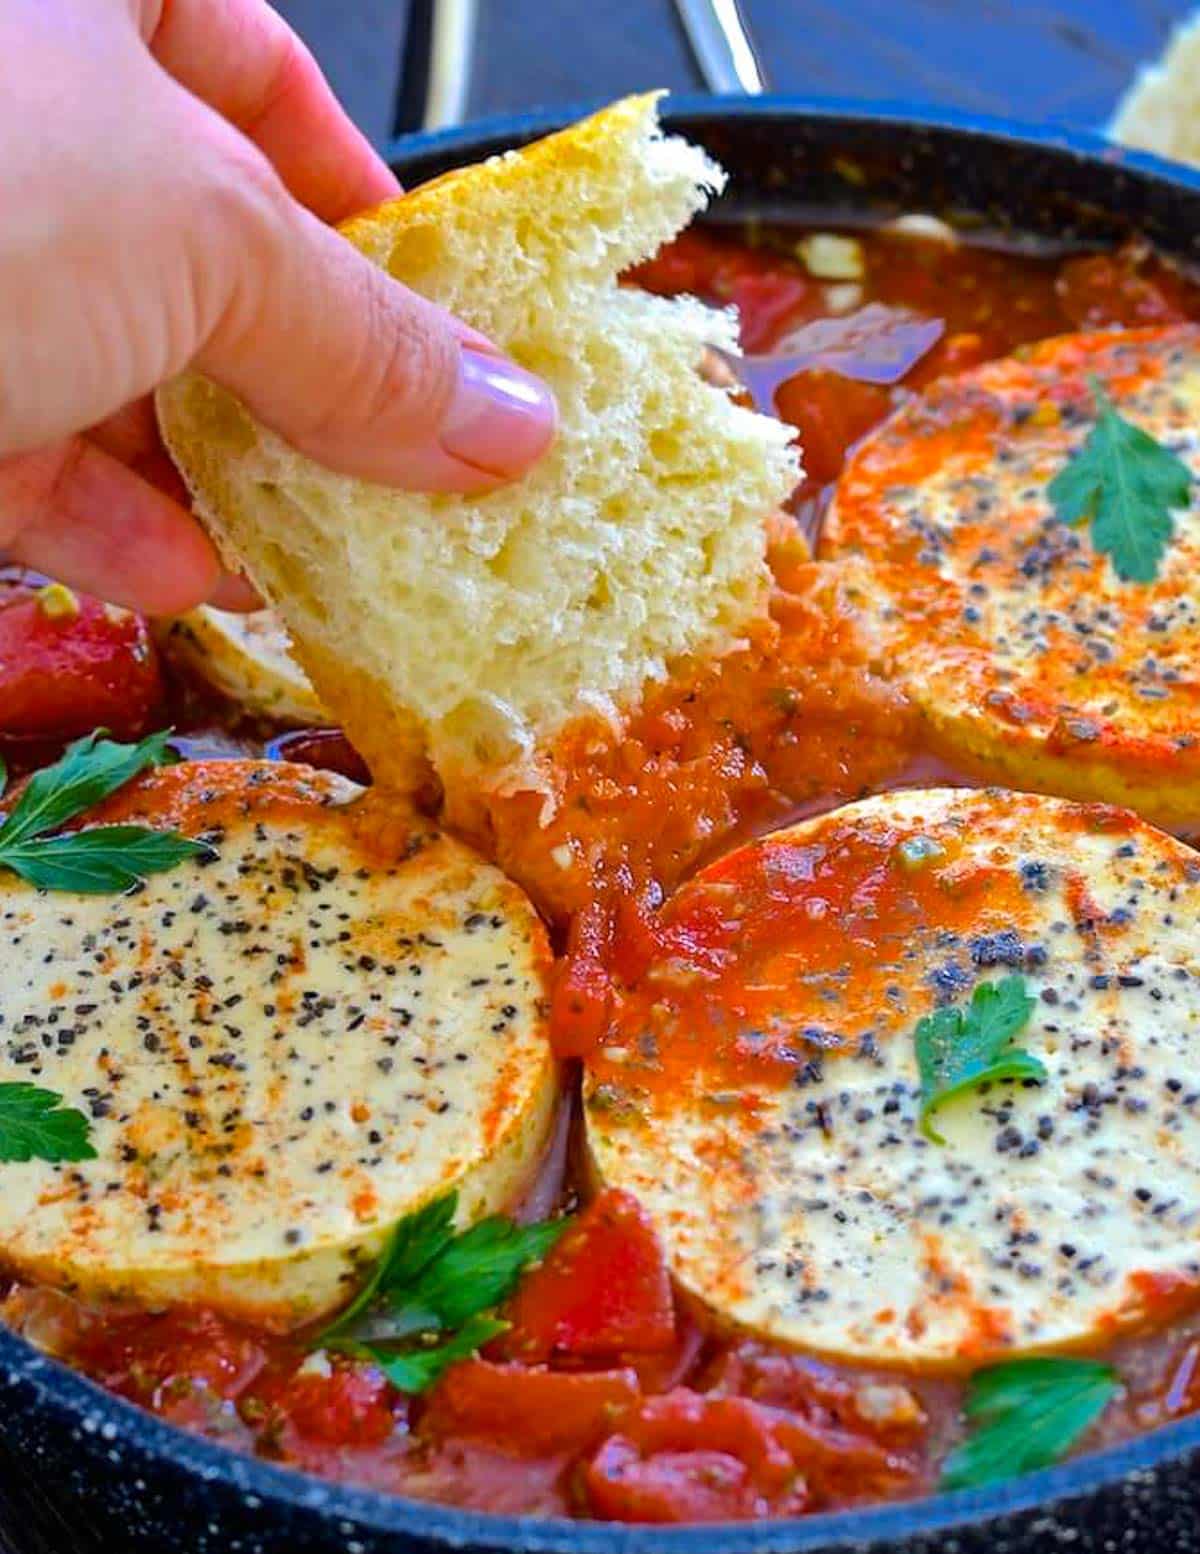 bread being dipped into shakshuka